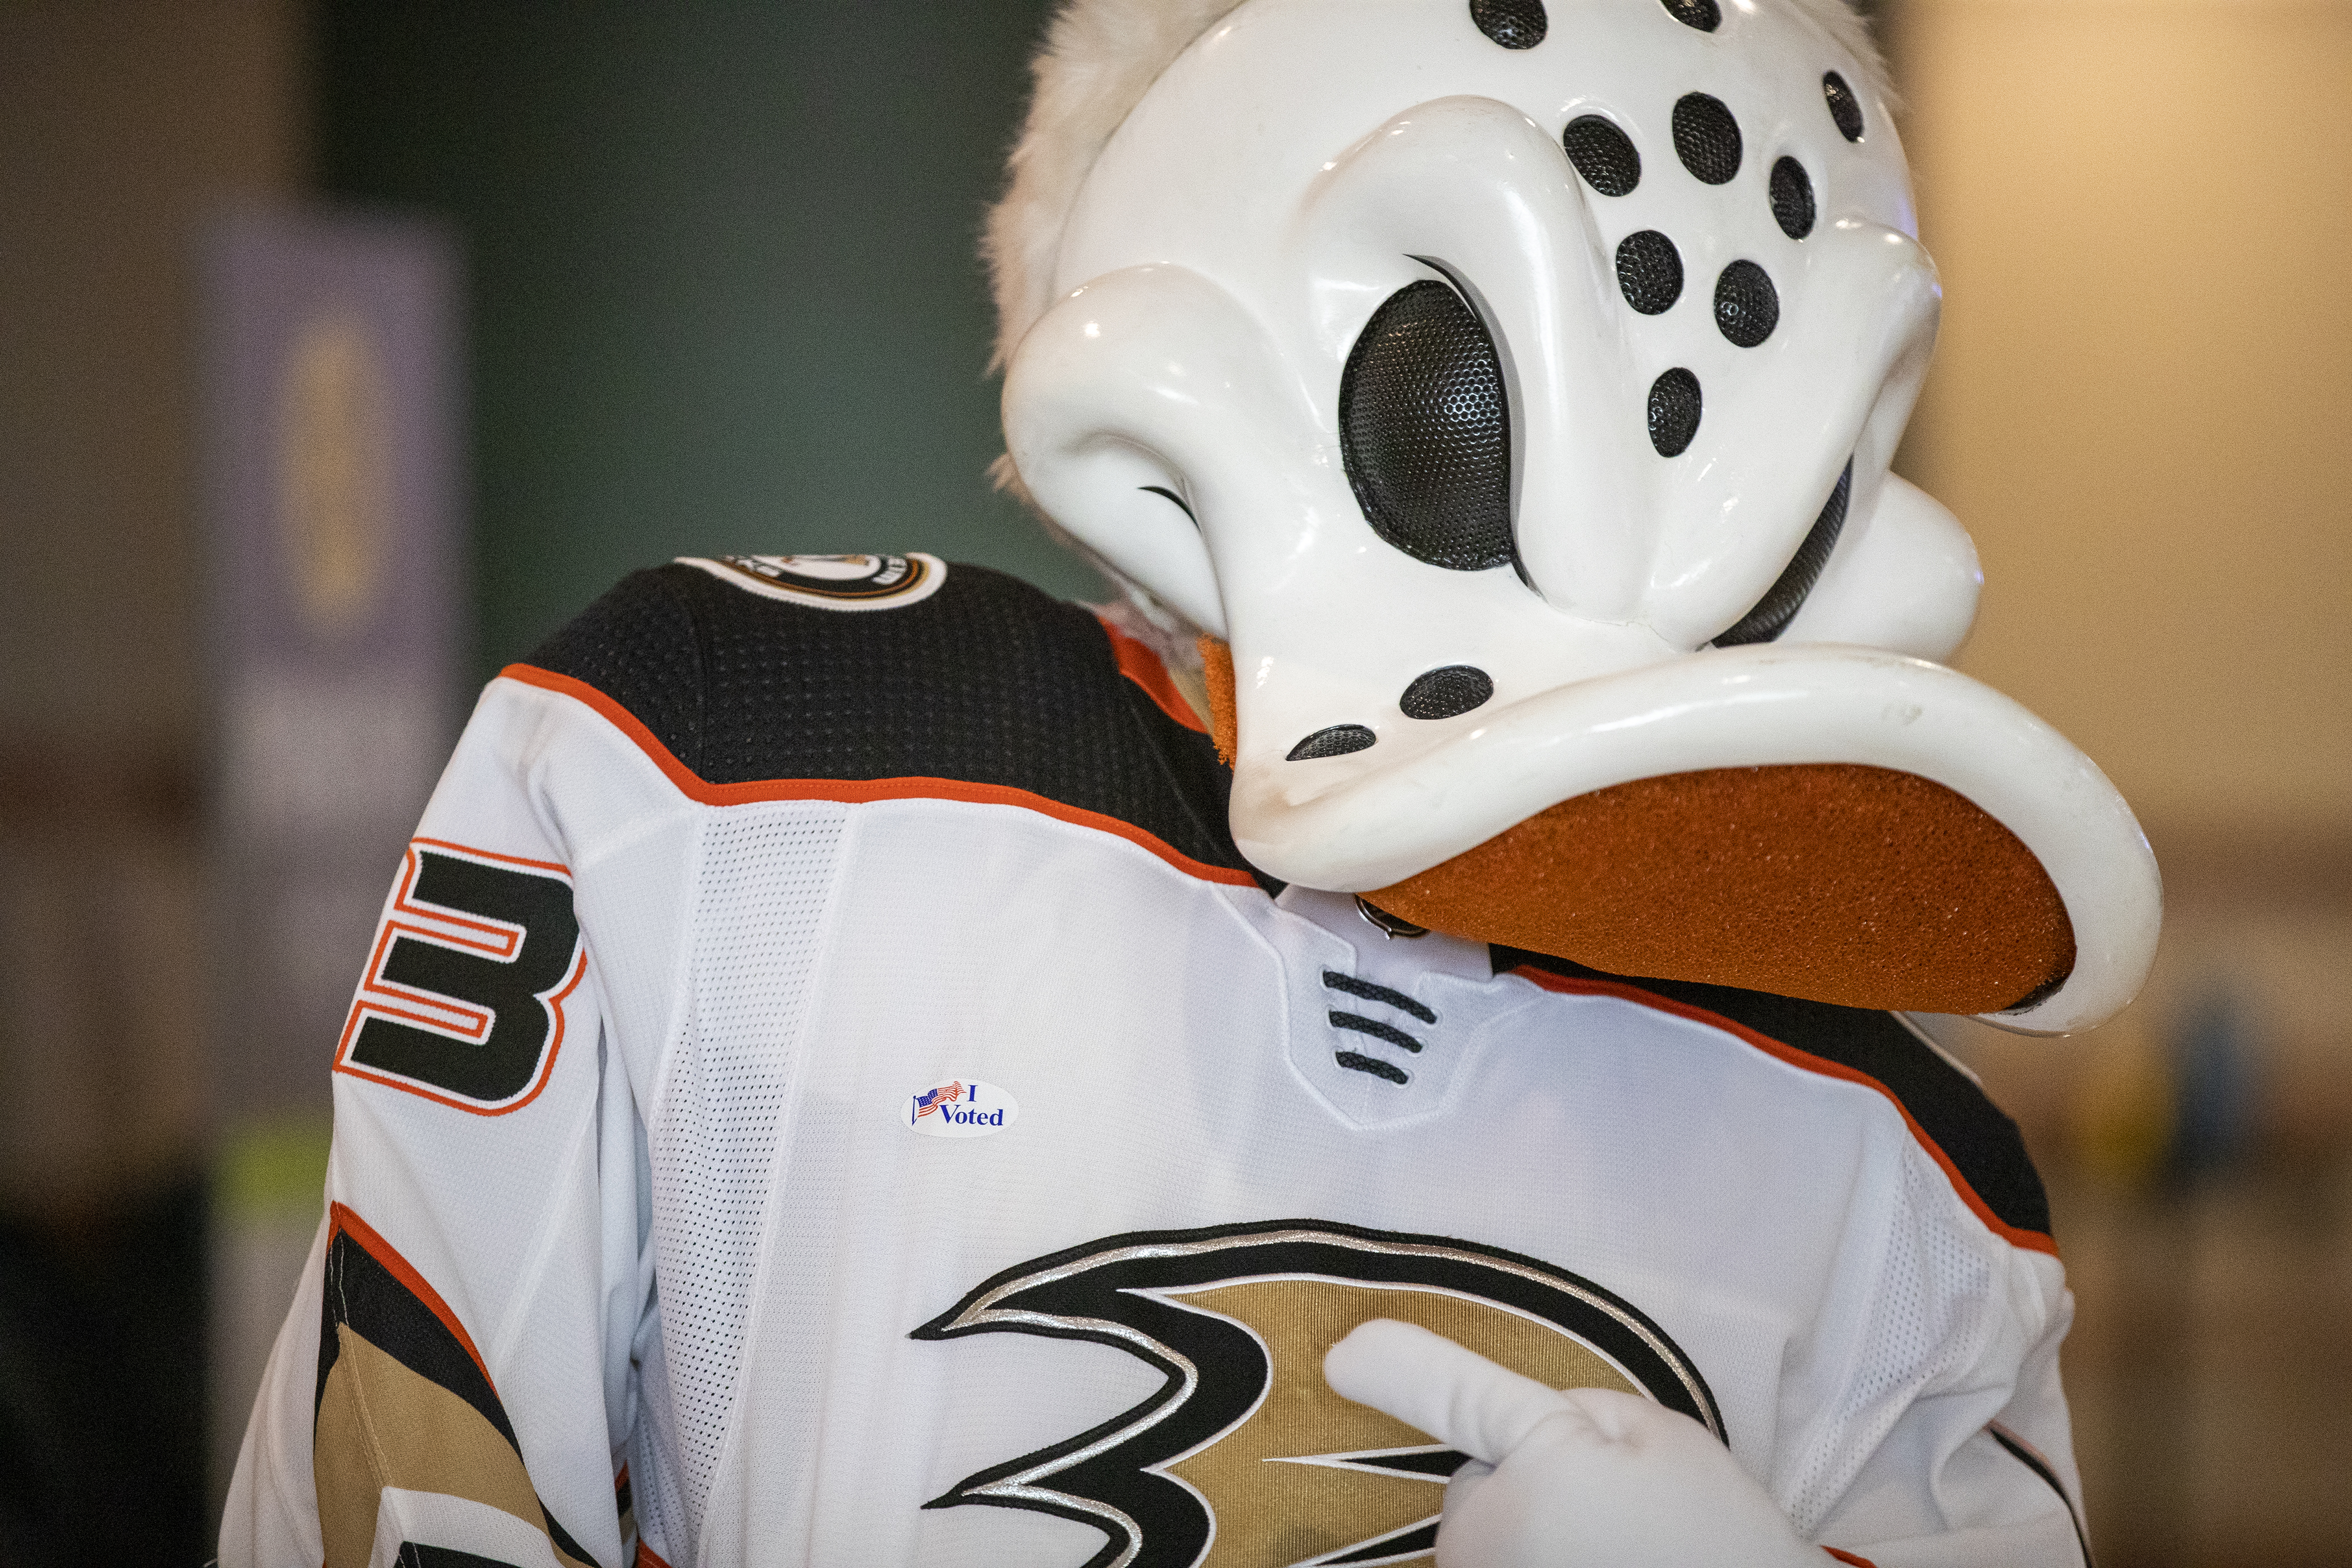 Ducks mascot Wild Wing shows off his I Voted sticker as he demonstrates how to vote during a media preview Wednesday, September 16, 2020 to showcase how the “Super Vote Center Site” will work at Orange County’s Honda Center.&nbsp;